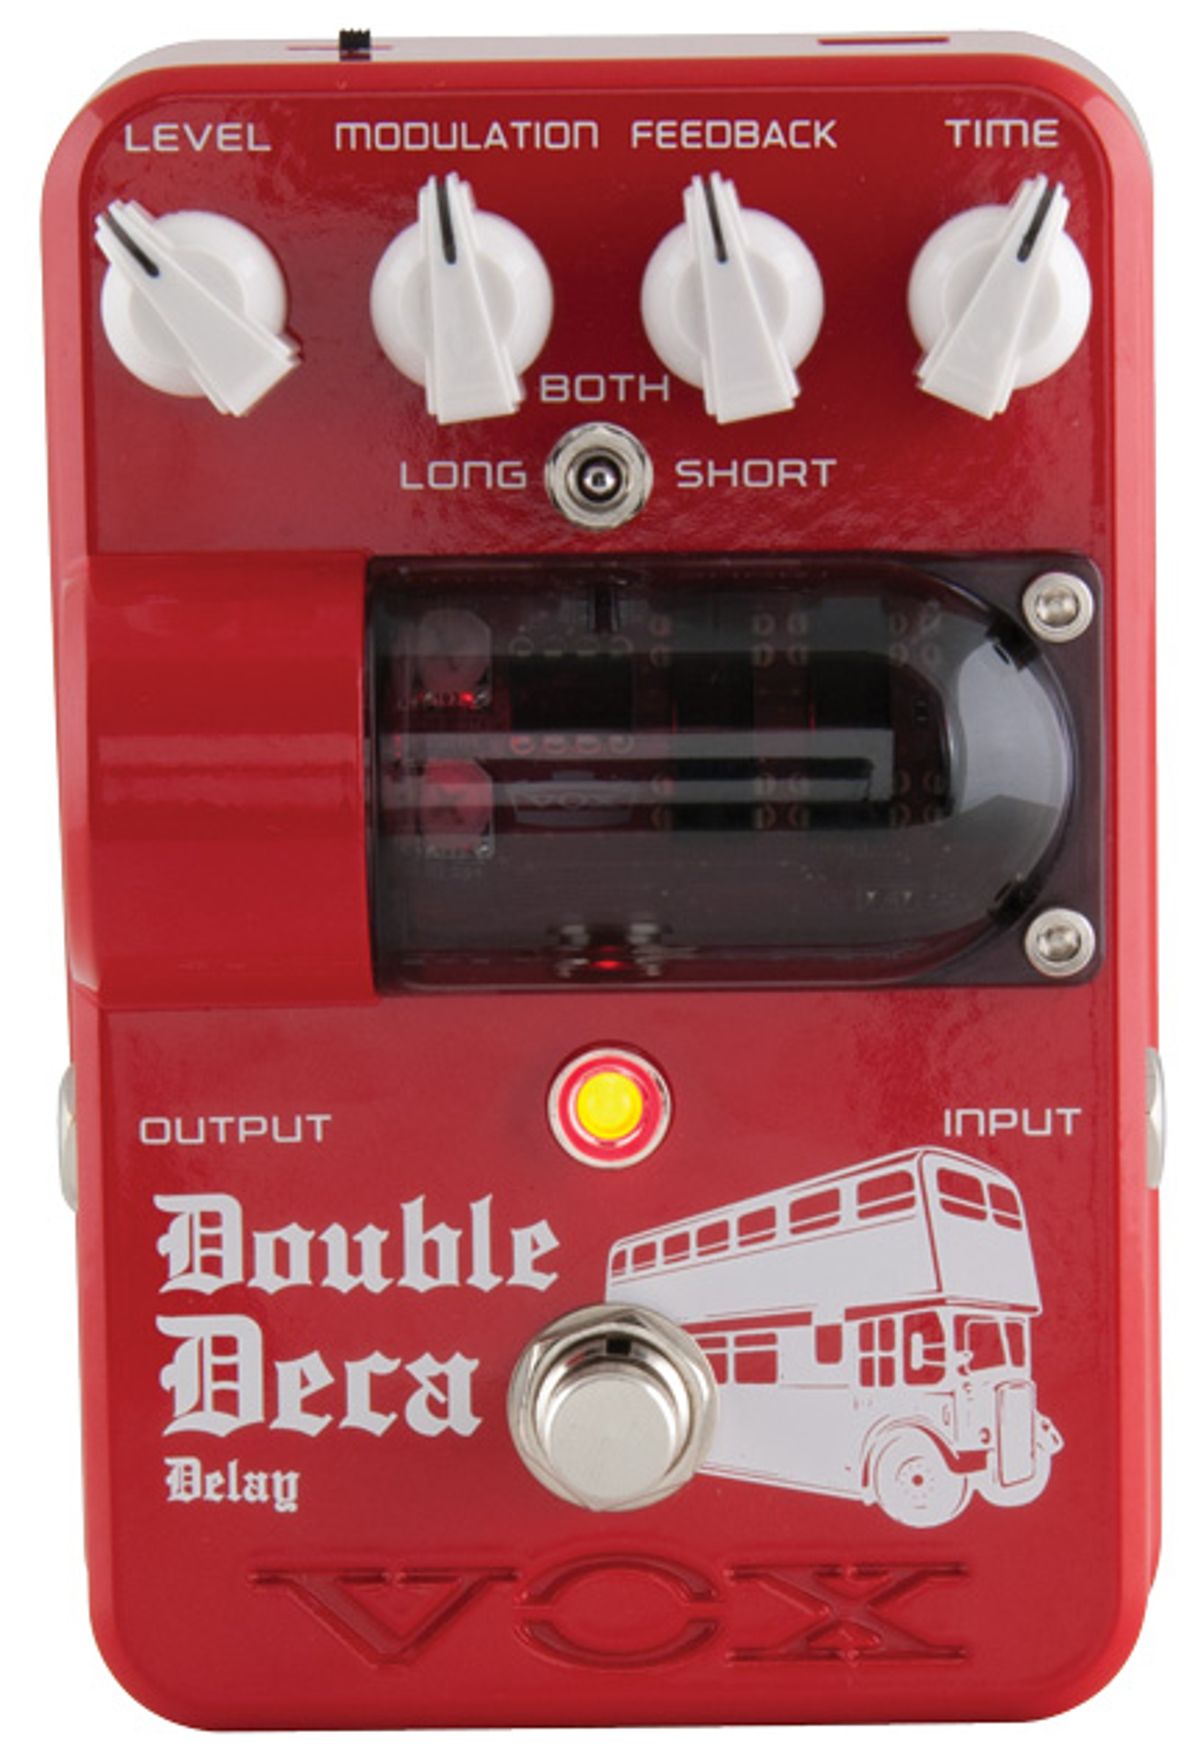 Vox Double Deca Analog Delay Review